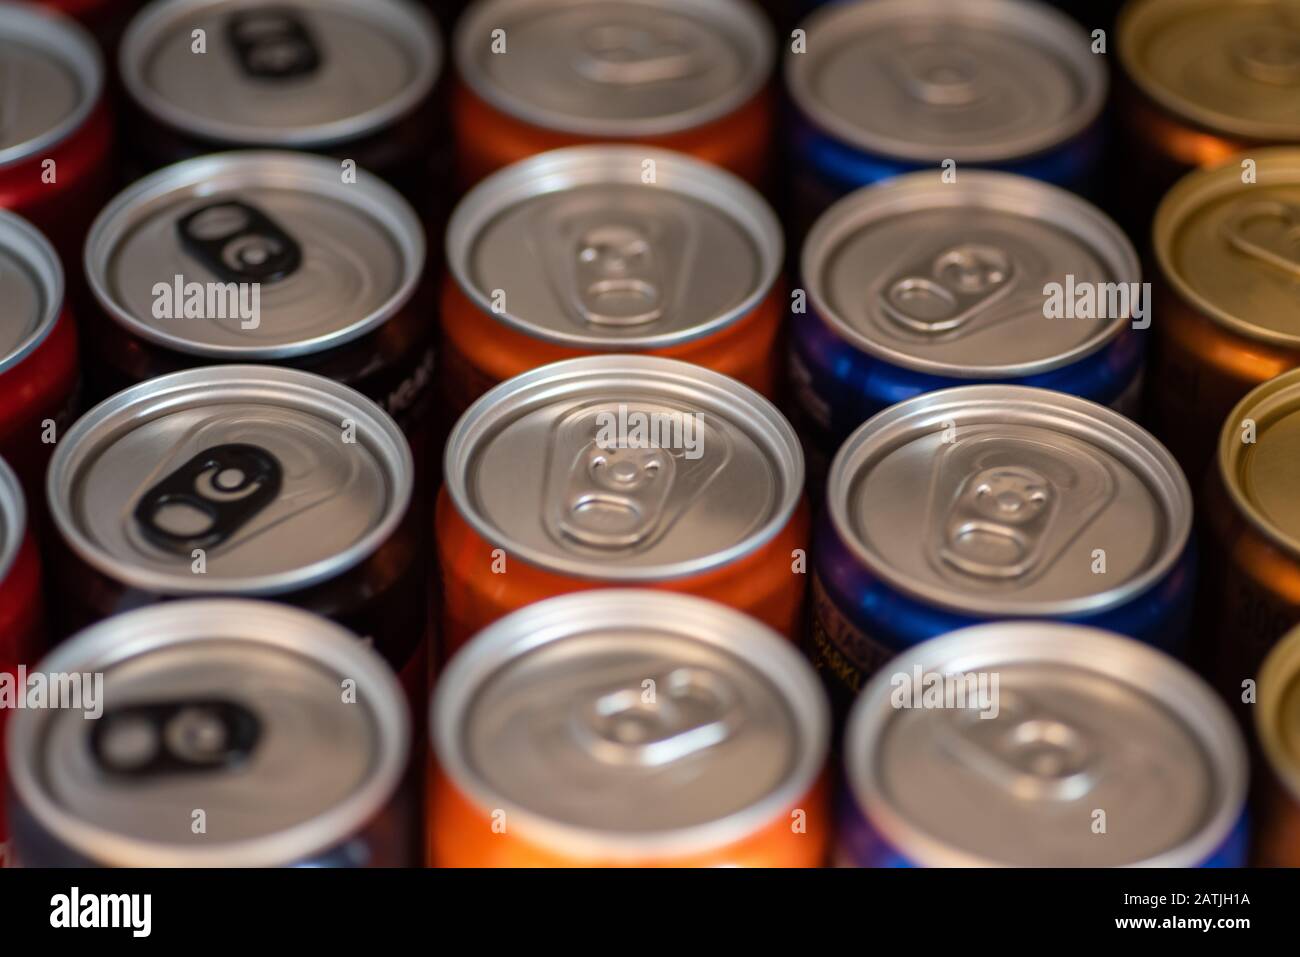 Pop cap tops from softdrink cans Stock Photo